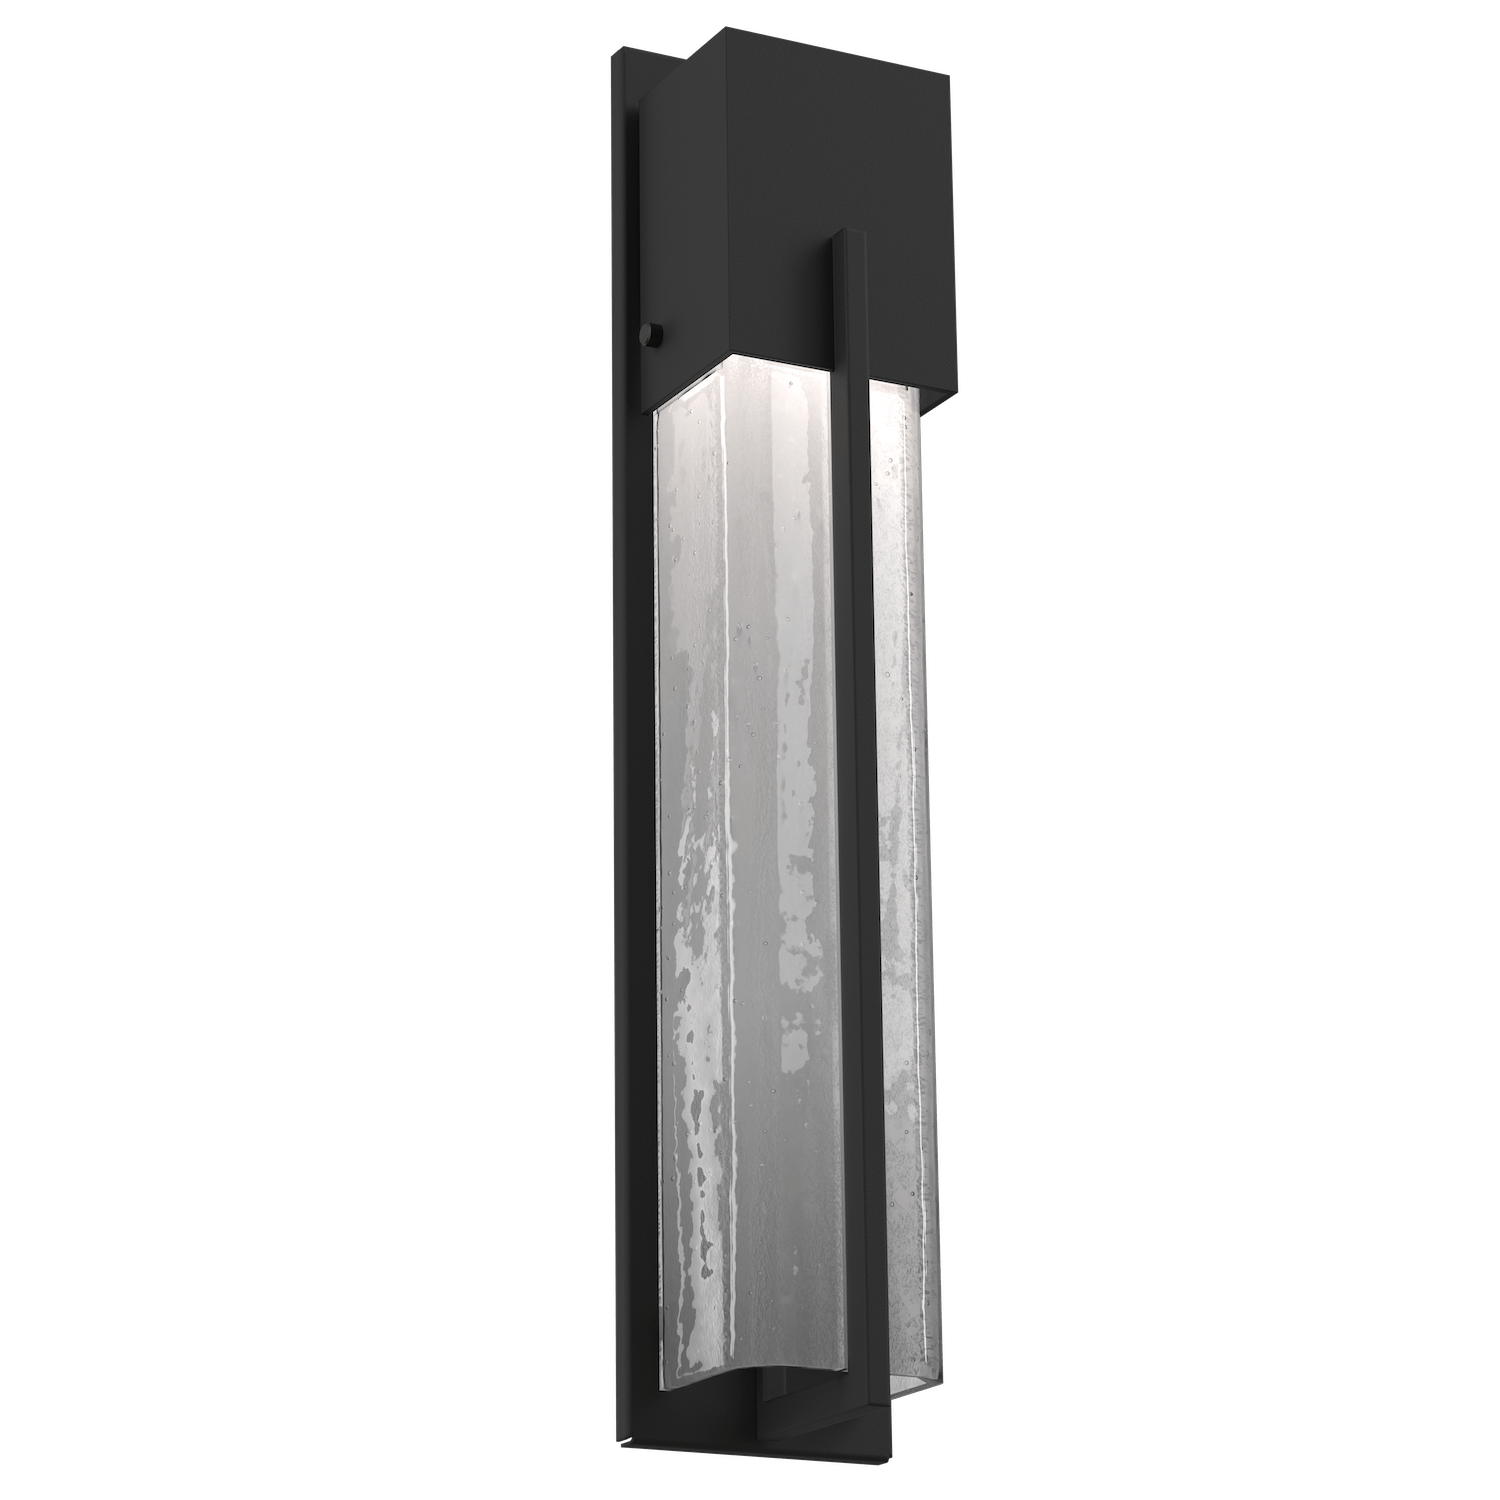 Hammerton Studio Square Outdoor Cover Sconce Outdoor l Wall Hammerton Studio 23 Textured Black (Outdoor) Frosted Granite